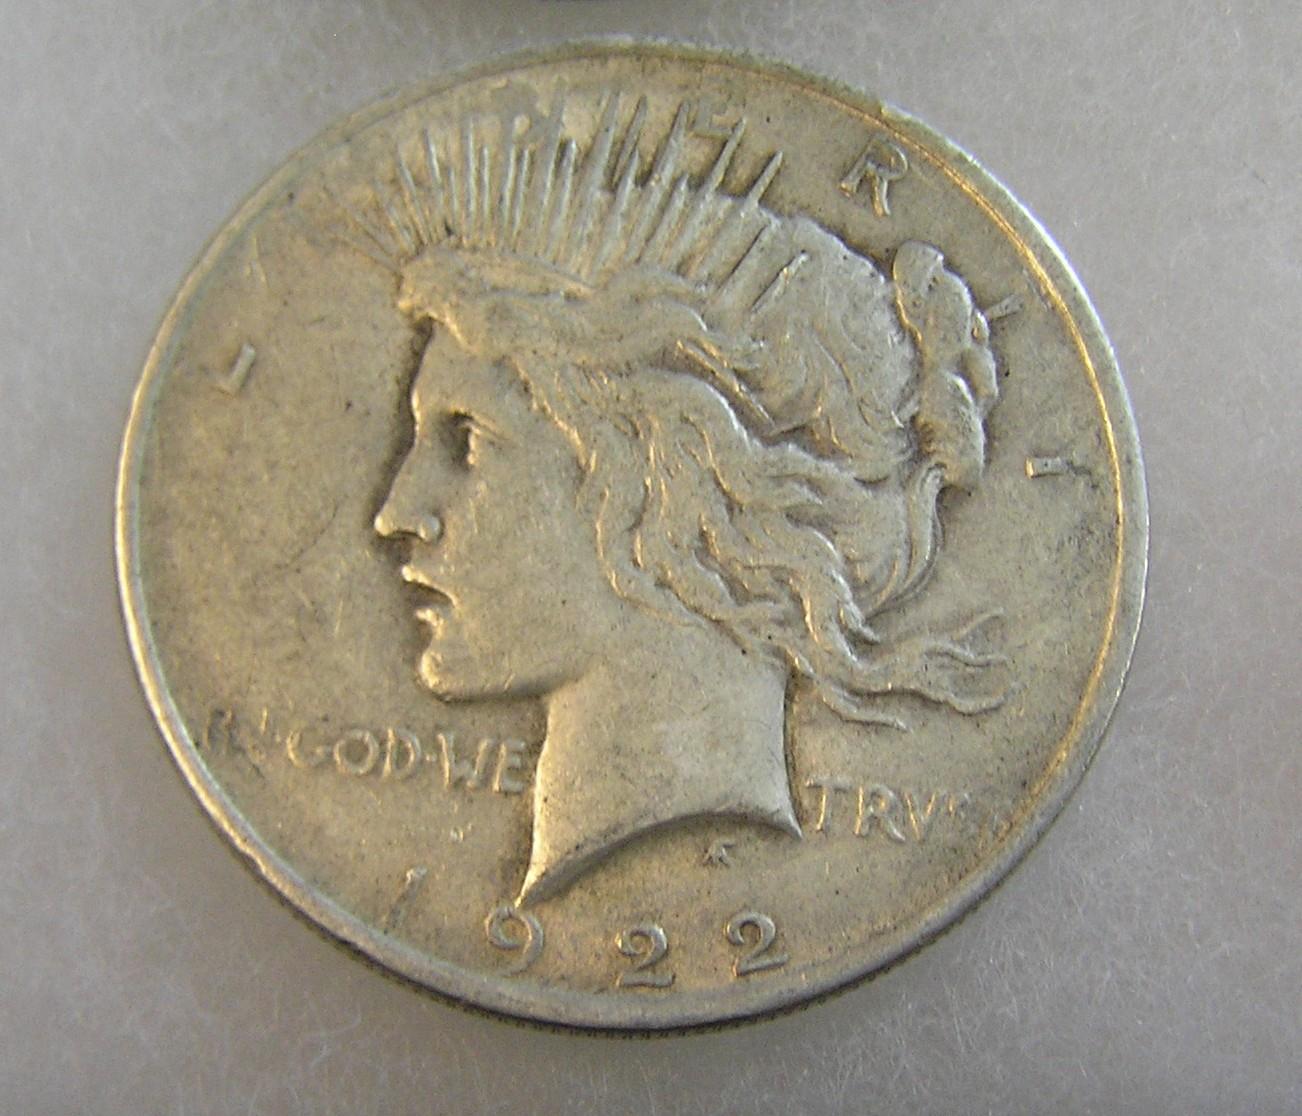 1922 Peace silver dollar in very good condition